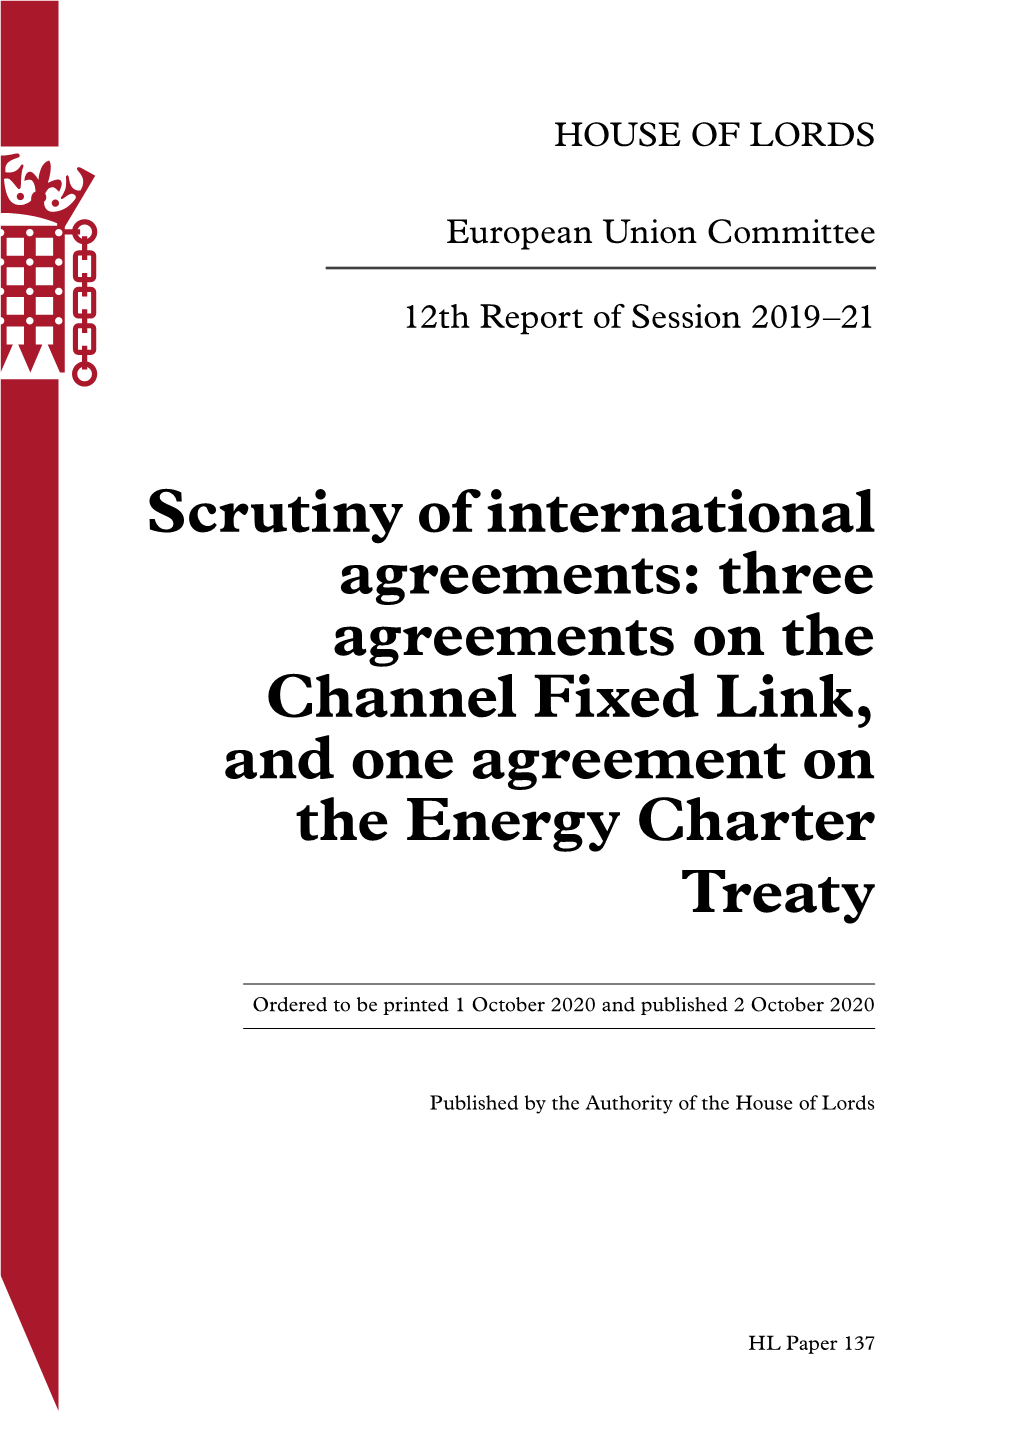 Scrutiny of International Agreements: Three Agreements on the Channel Fixed Link, and One Agreement on the Energy Charter Treaty